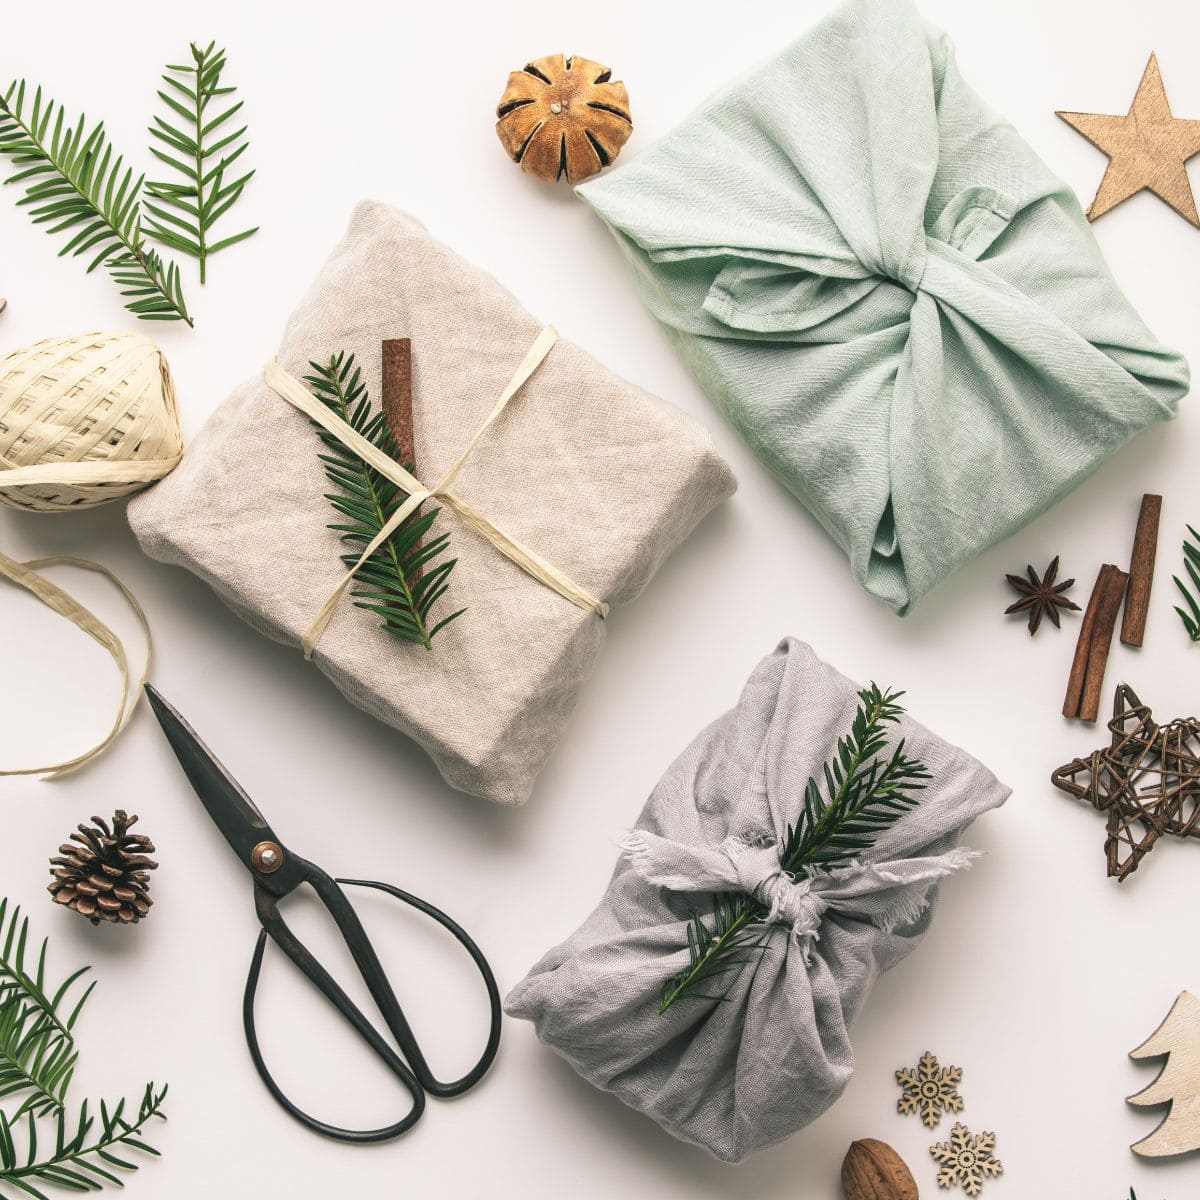 The 8 Best Reusable Gift Bags and Wraps